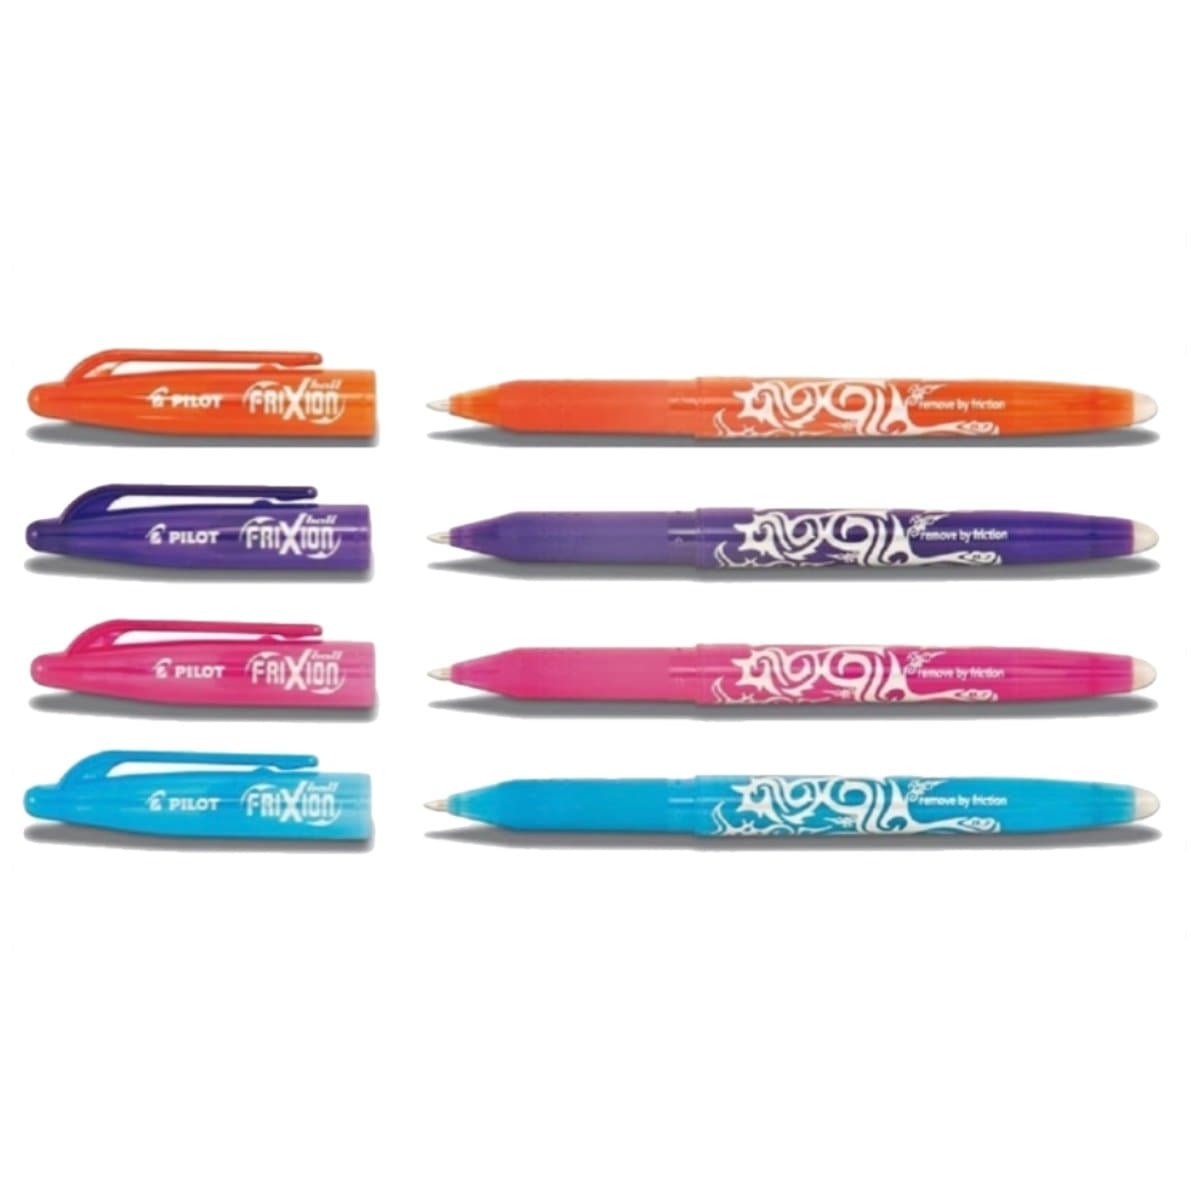 Pilot Frixion Clicker Erasable Pen with Pink, Purple and Turquoise